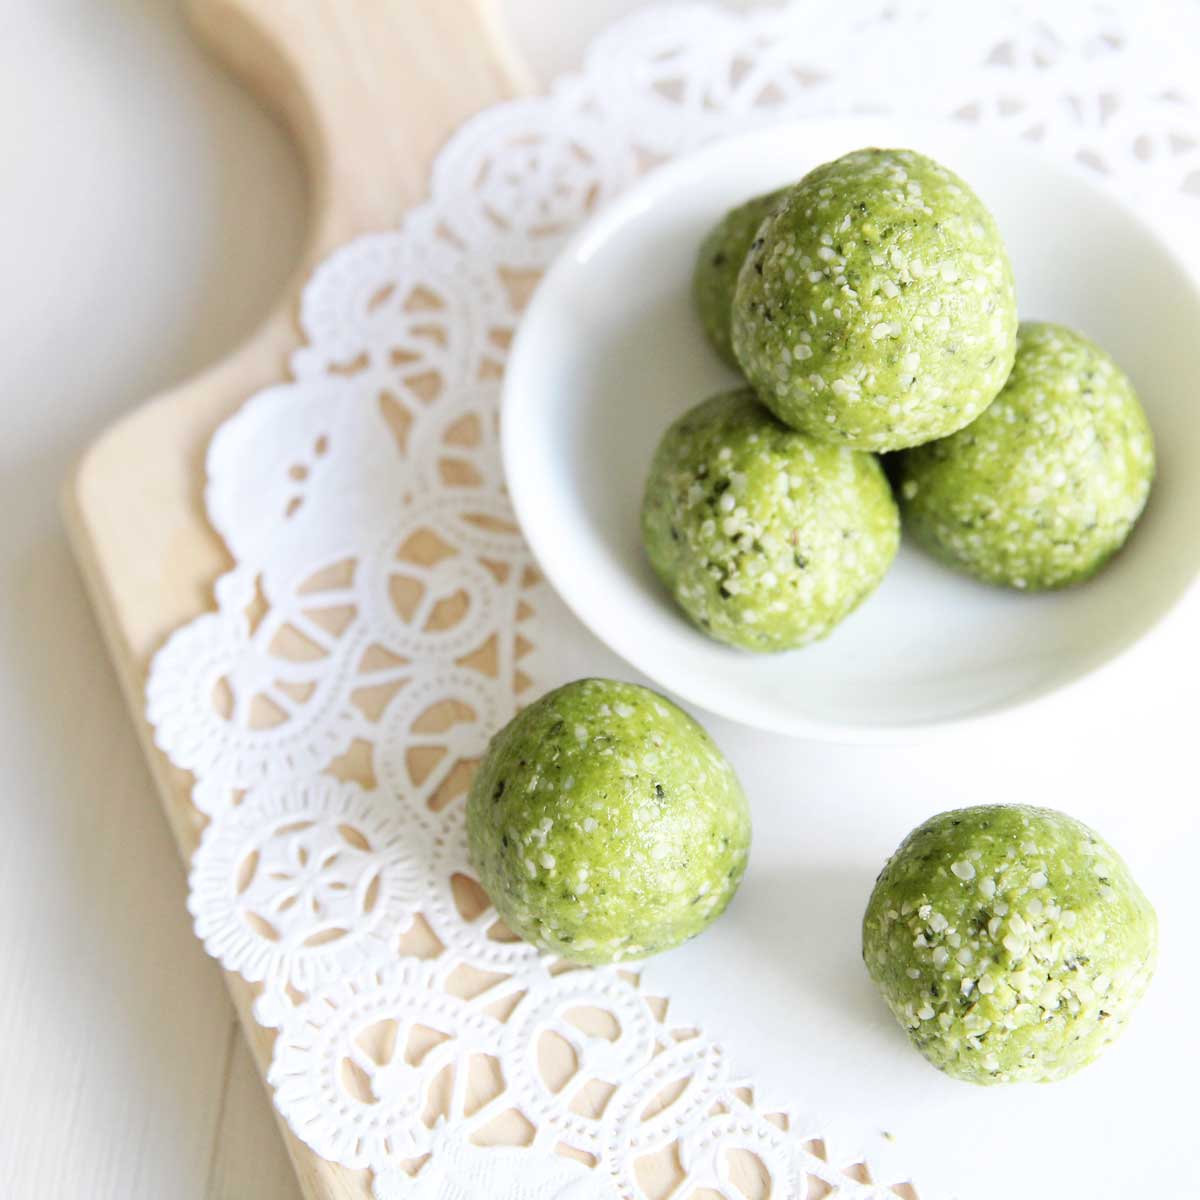 Power Packed Matcha Latte Protein Balls Recipe with Collagen Peptides - Lemon Cheesecake Protein Balls